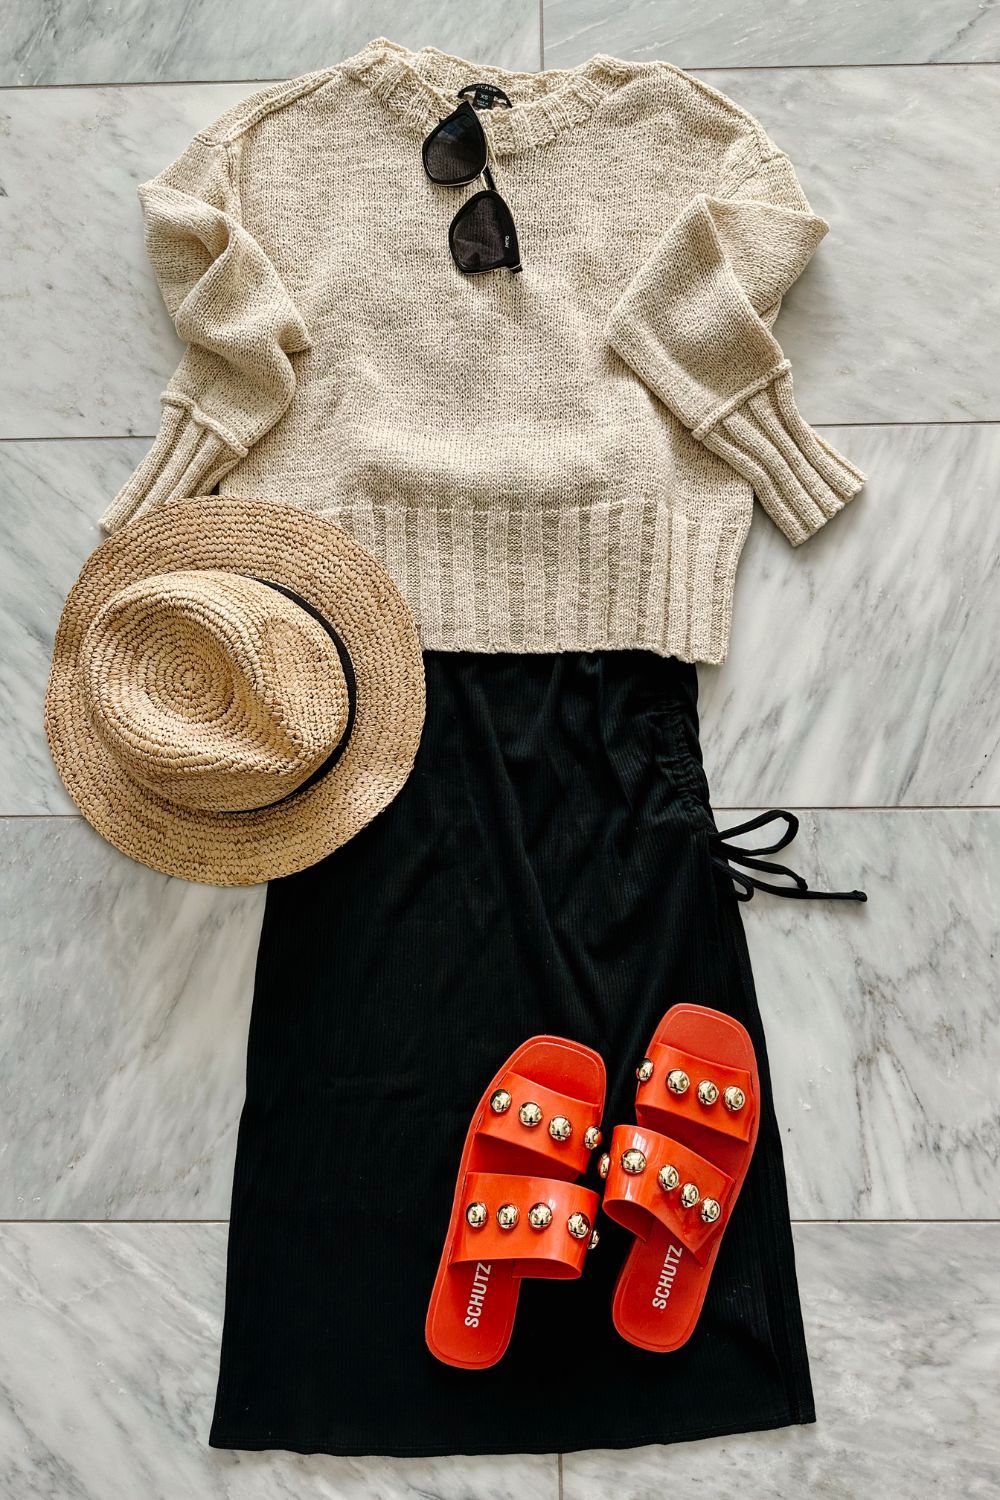 A midi dress styled with a light weight sweater, hat, and sandals 